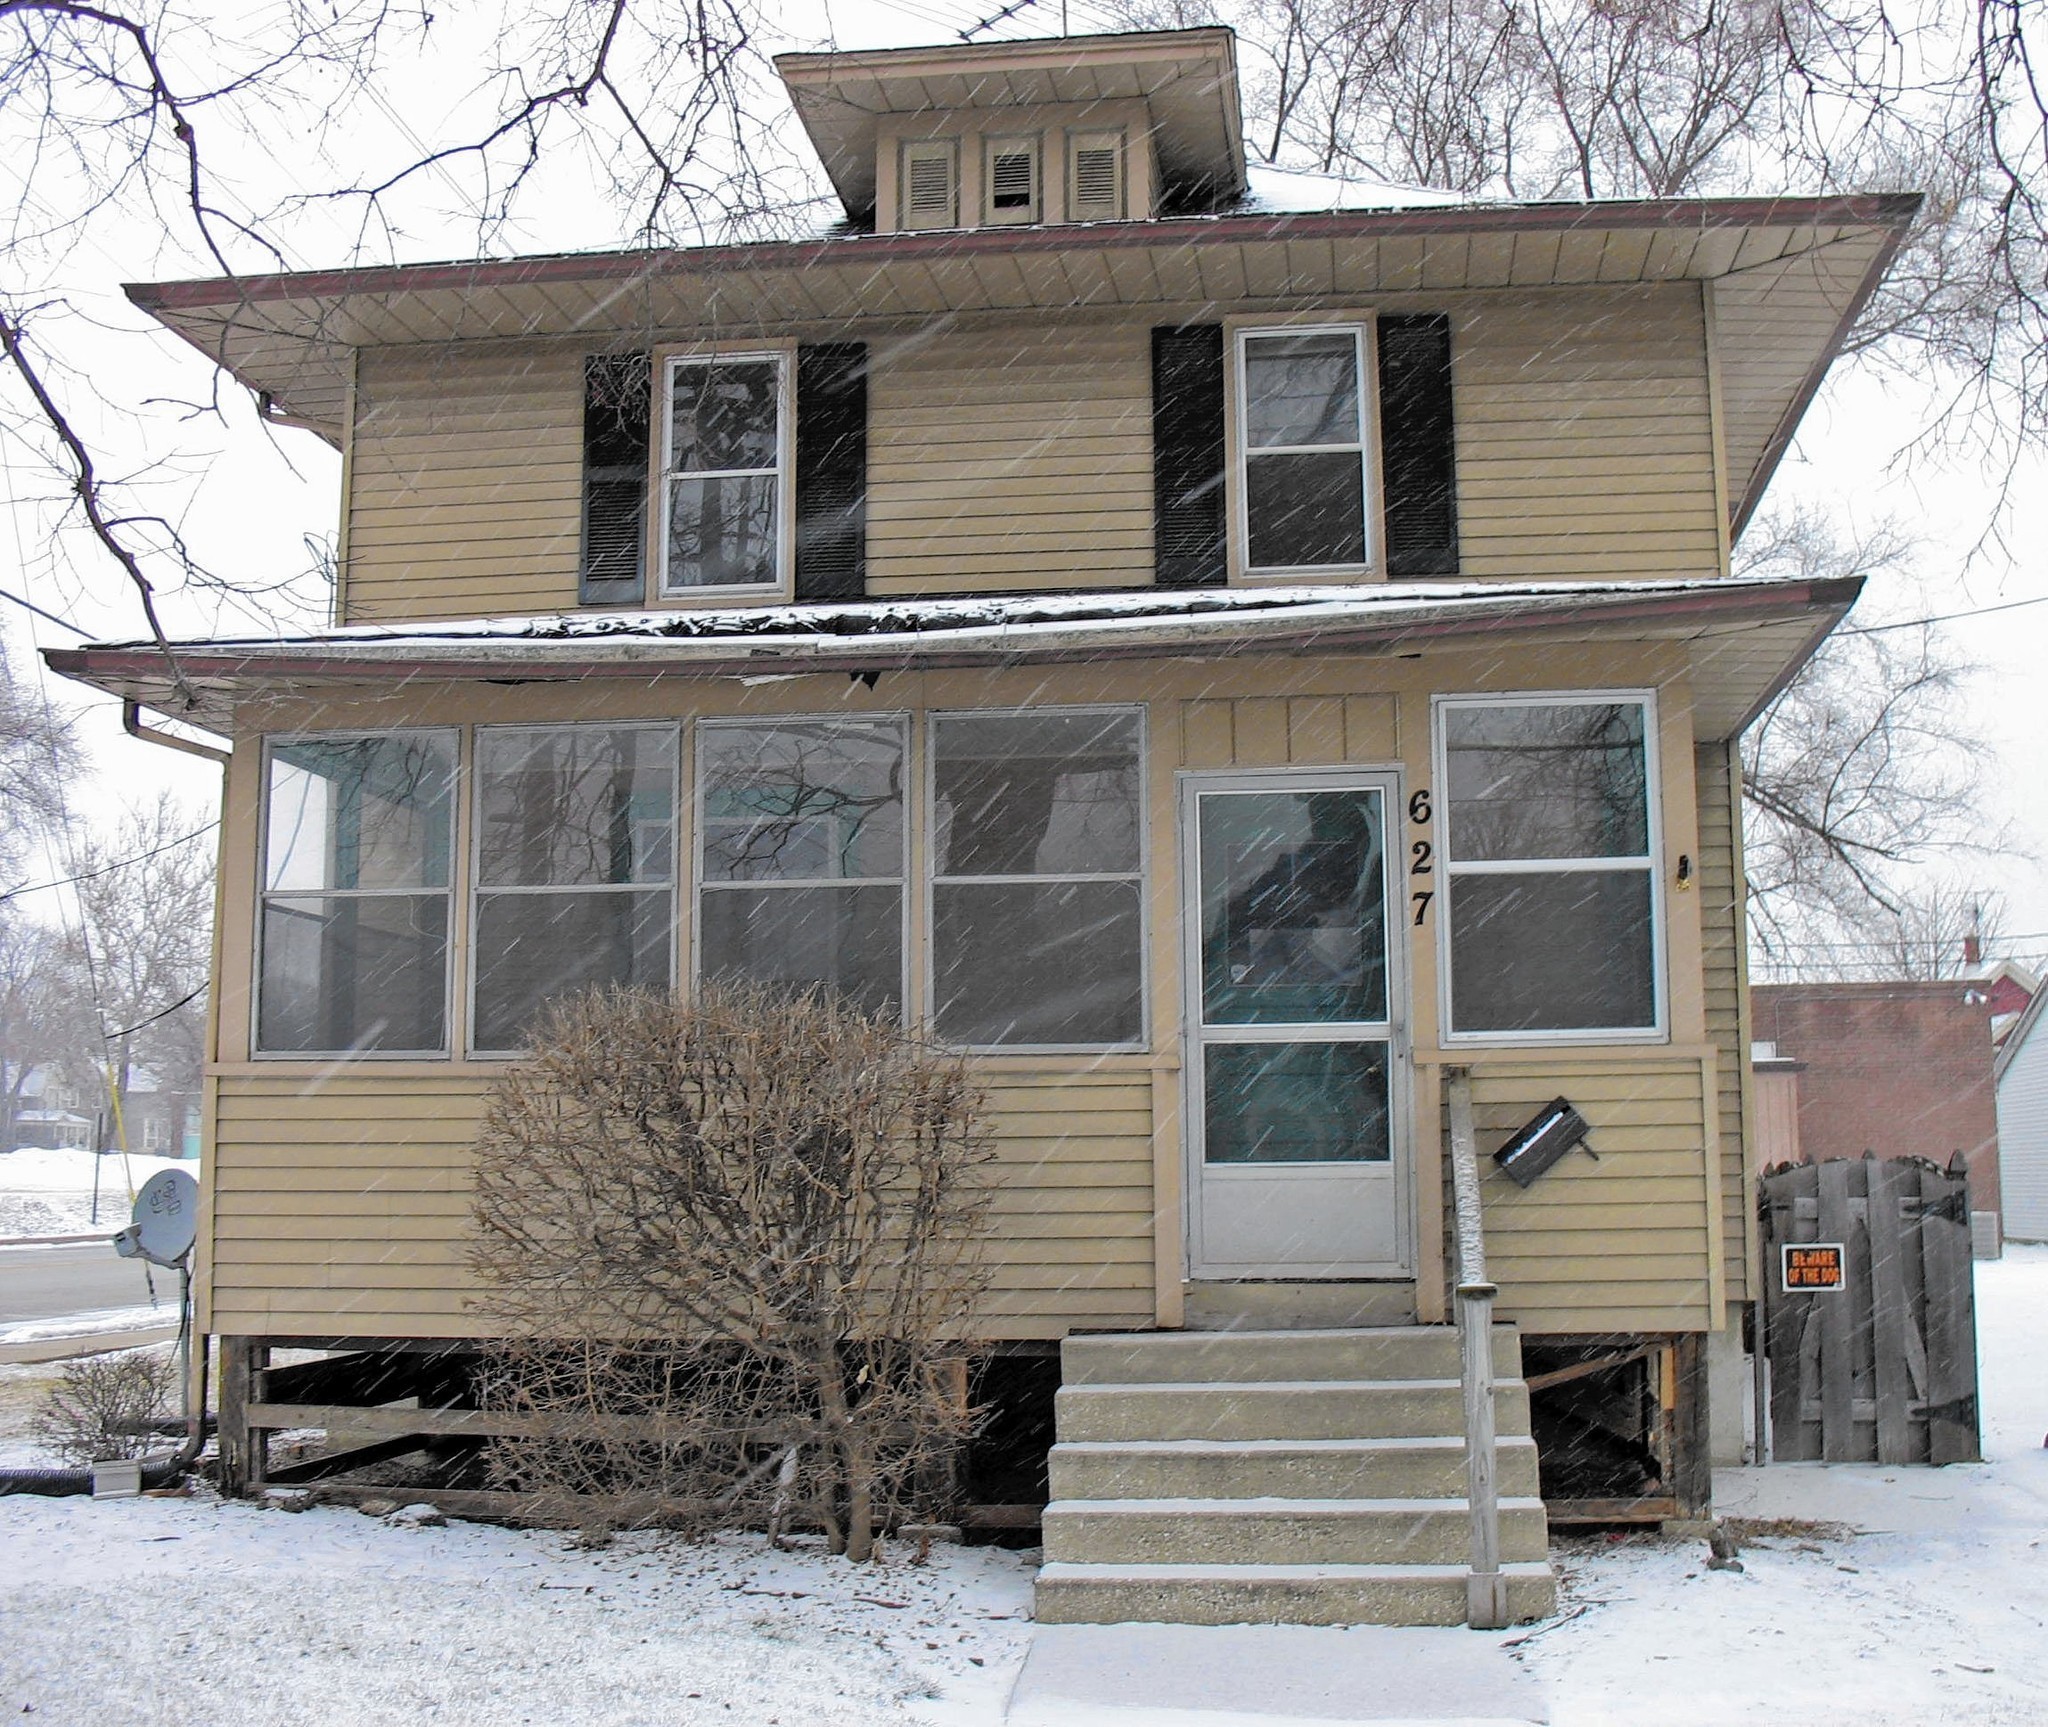 Historic Geneva house for sale, but needs to be moved - Aurora Beacon-News